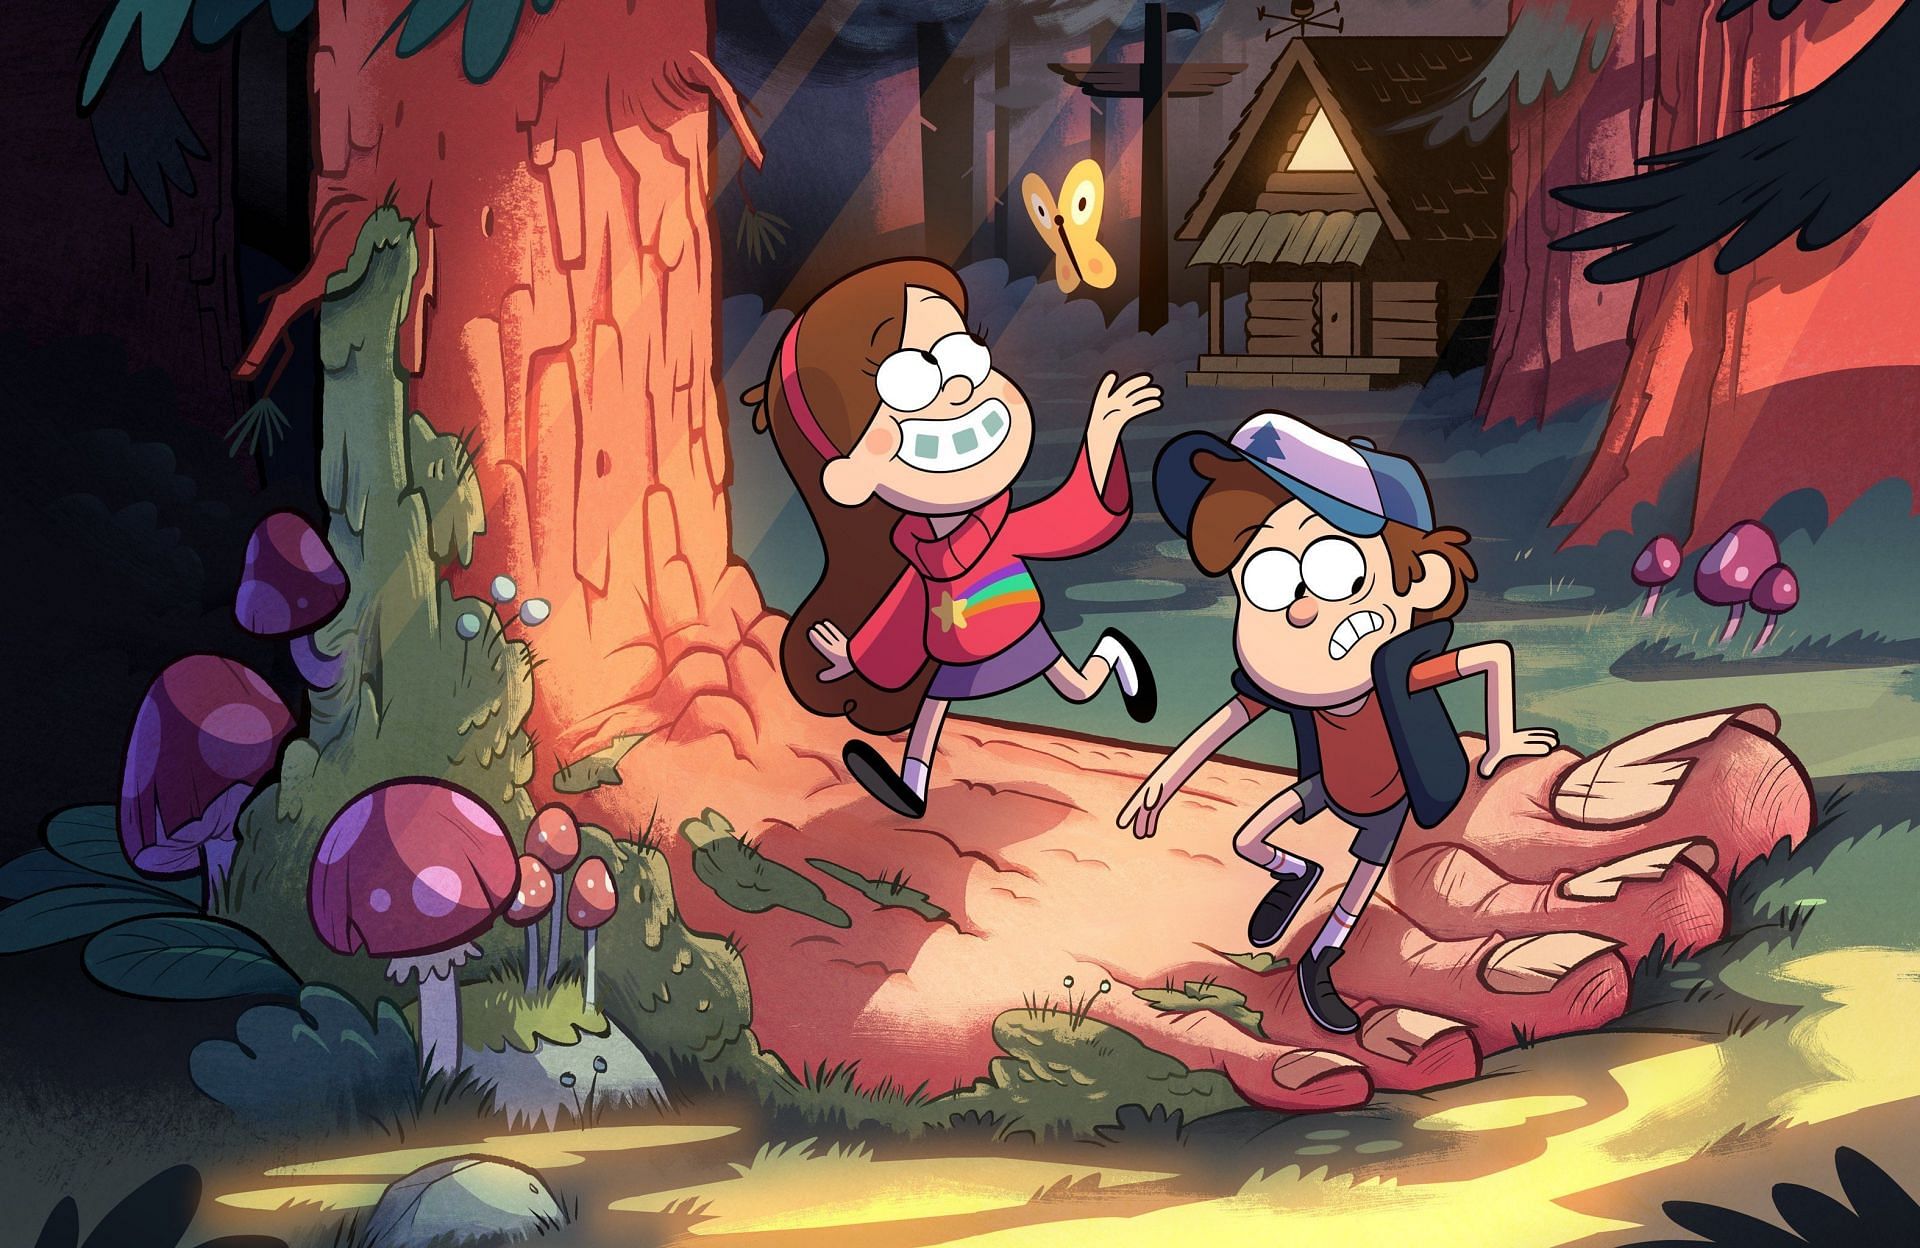 From Youthful Curiosity to Ageless Enigma: The Characters of Gravity Falls (Image via Disney)